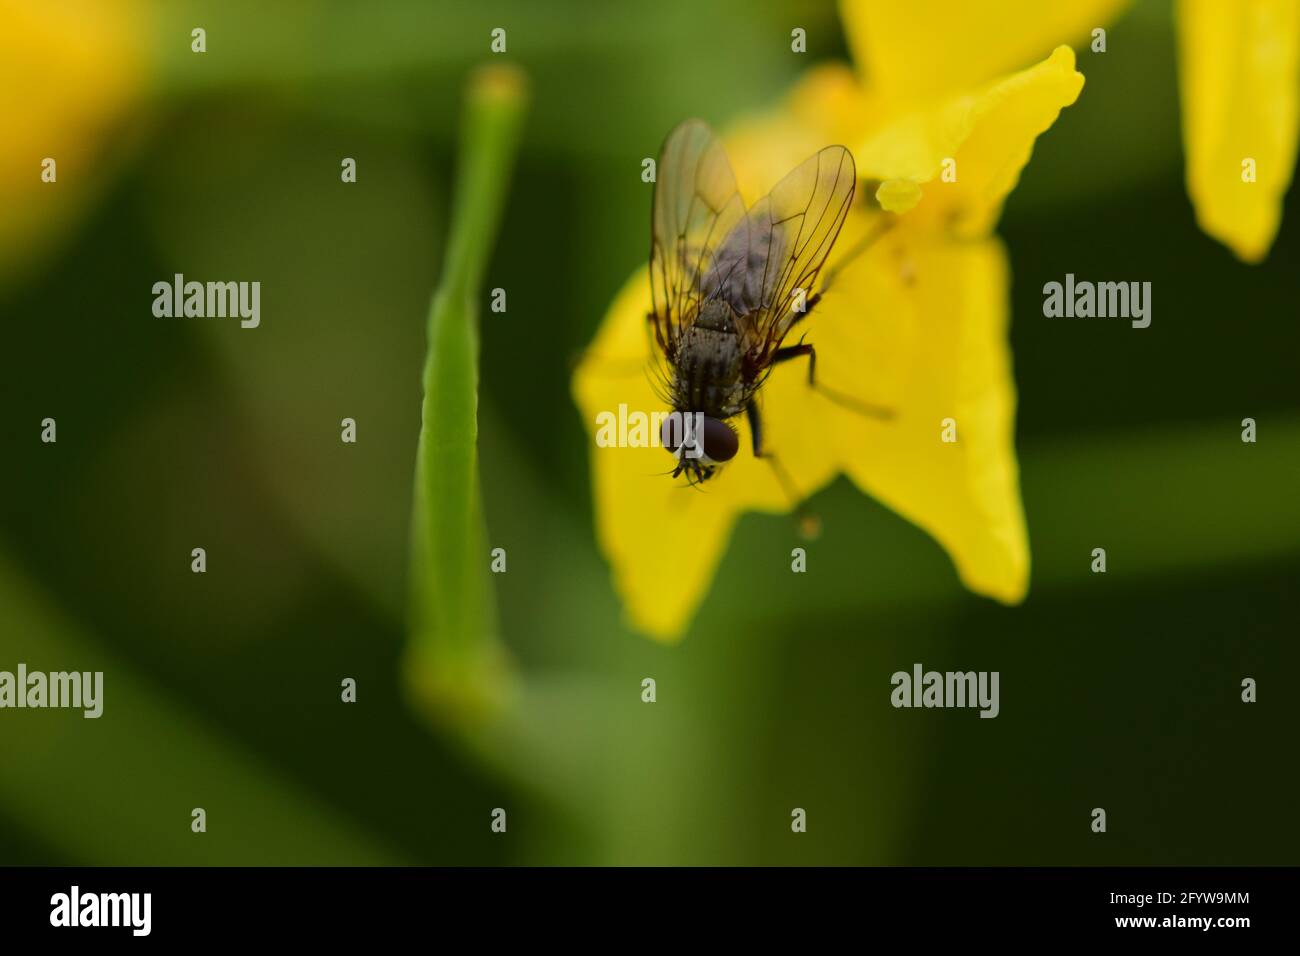 Black fly on a yellow rapeseed flower against a green background as a close up Stock Photo